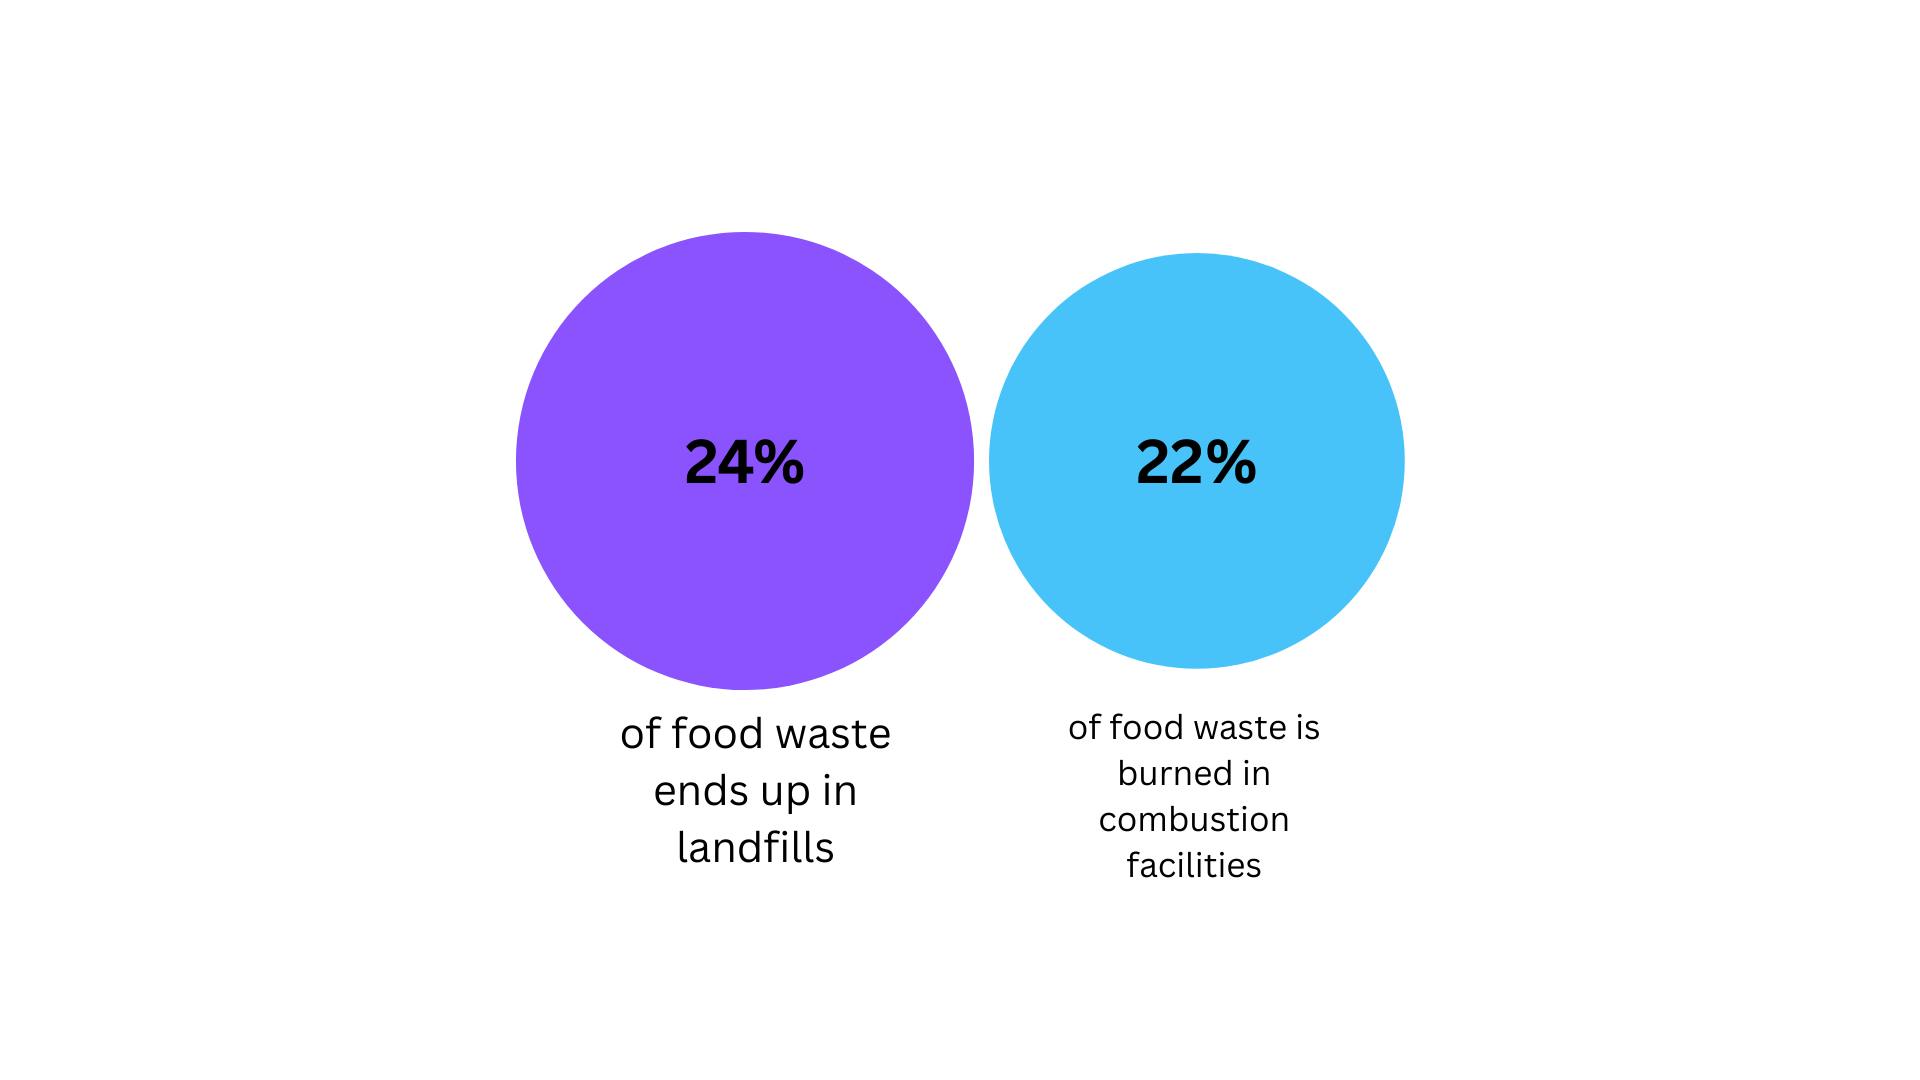 Food waste statistics - The contribution of food waste to the overall waste stream